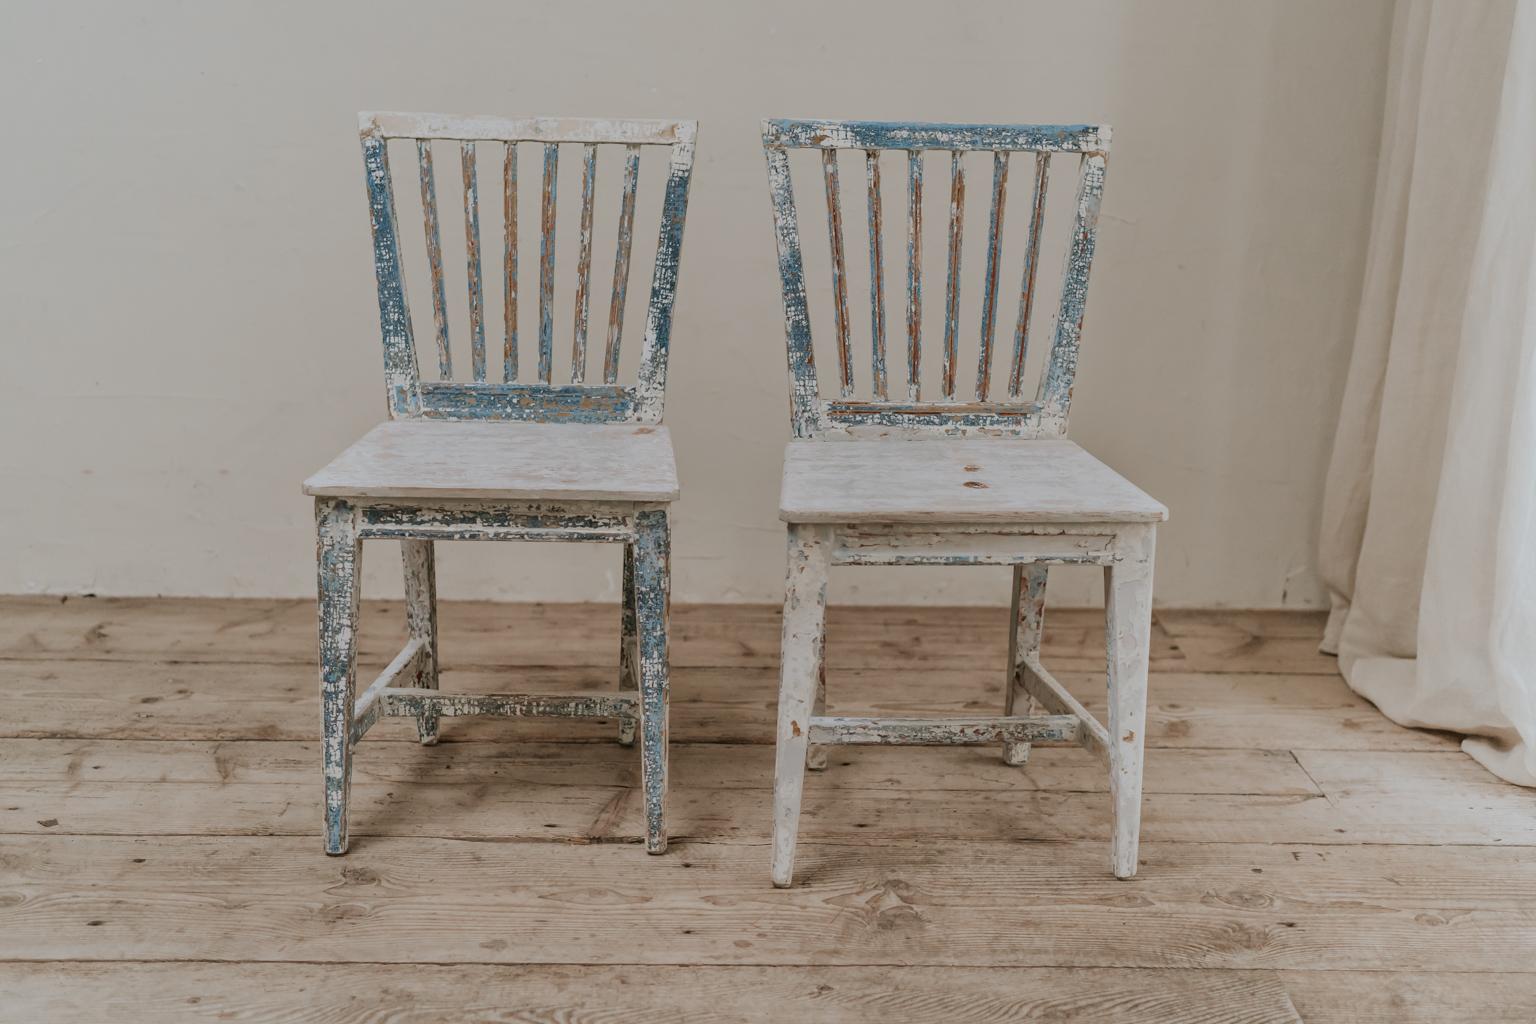 A charming pair of 19th century Swedish chairs, crusty old paint on pinewood.